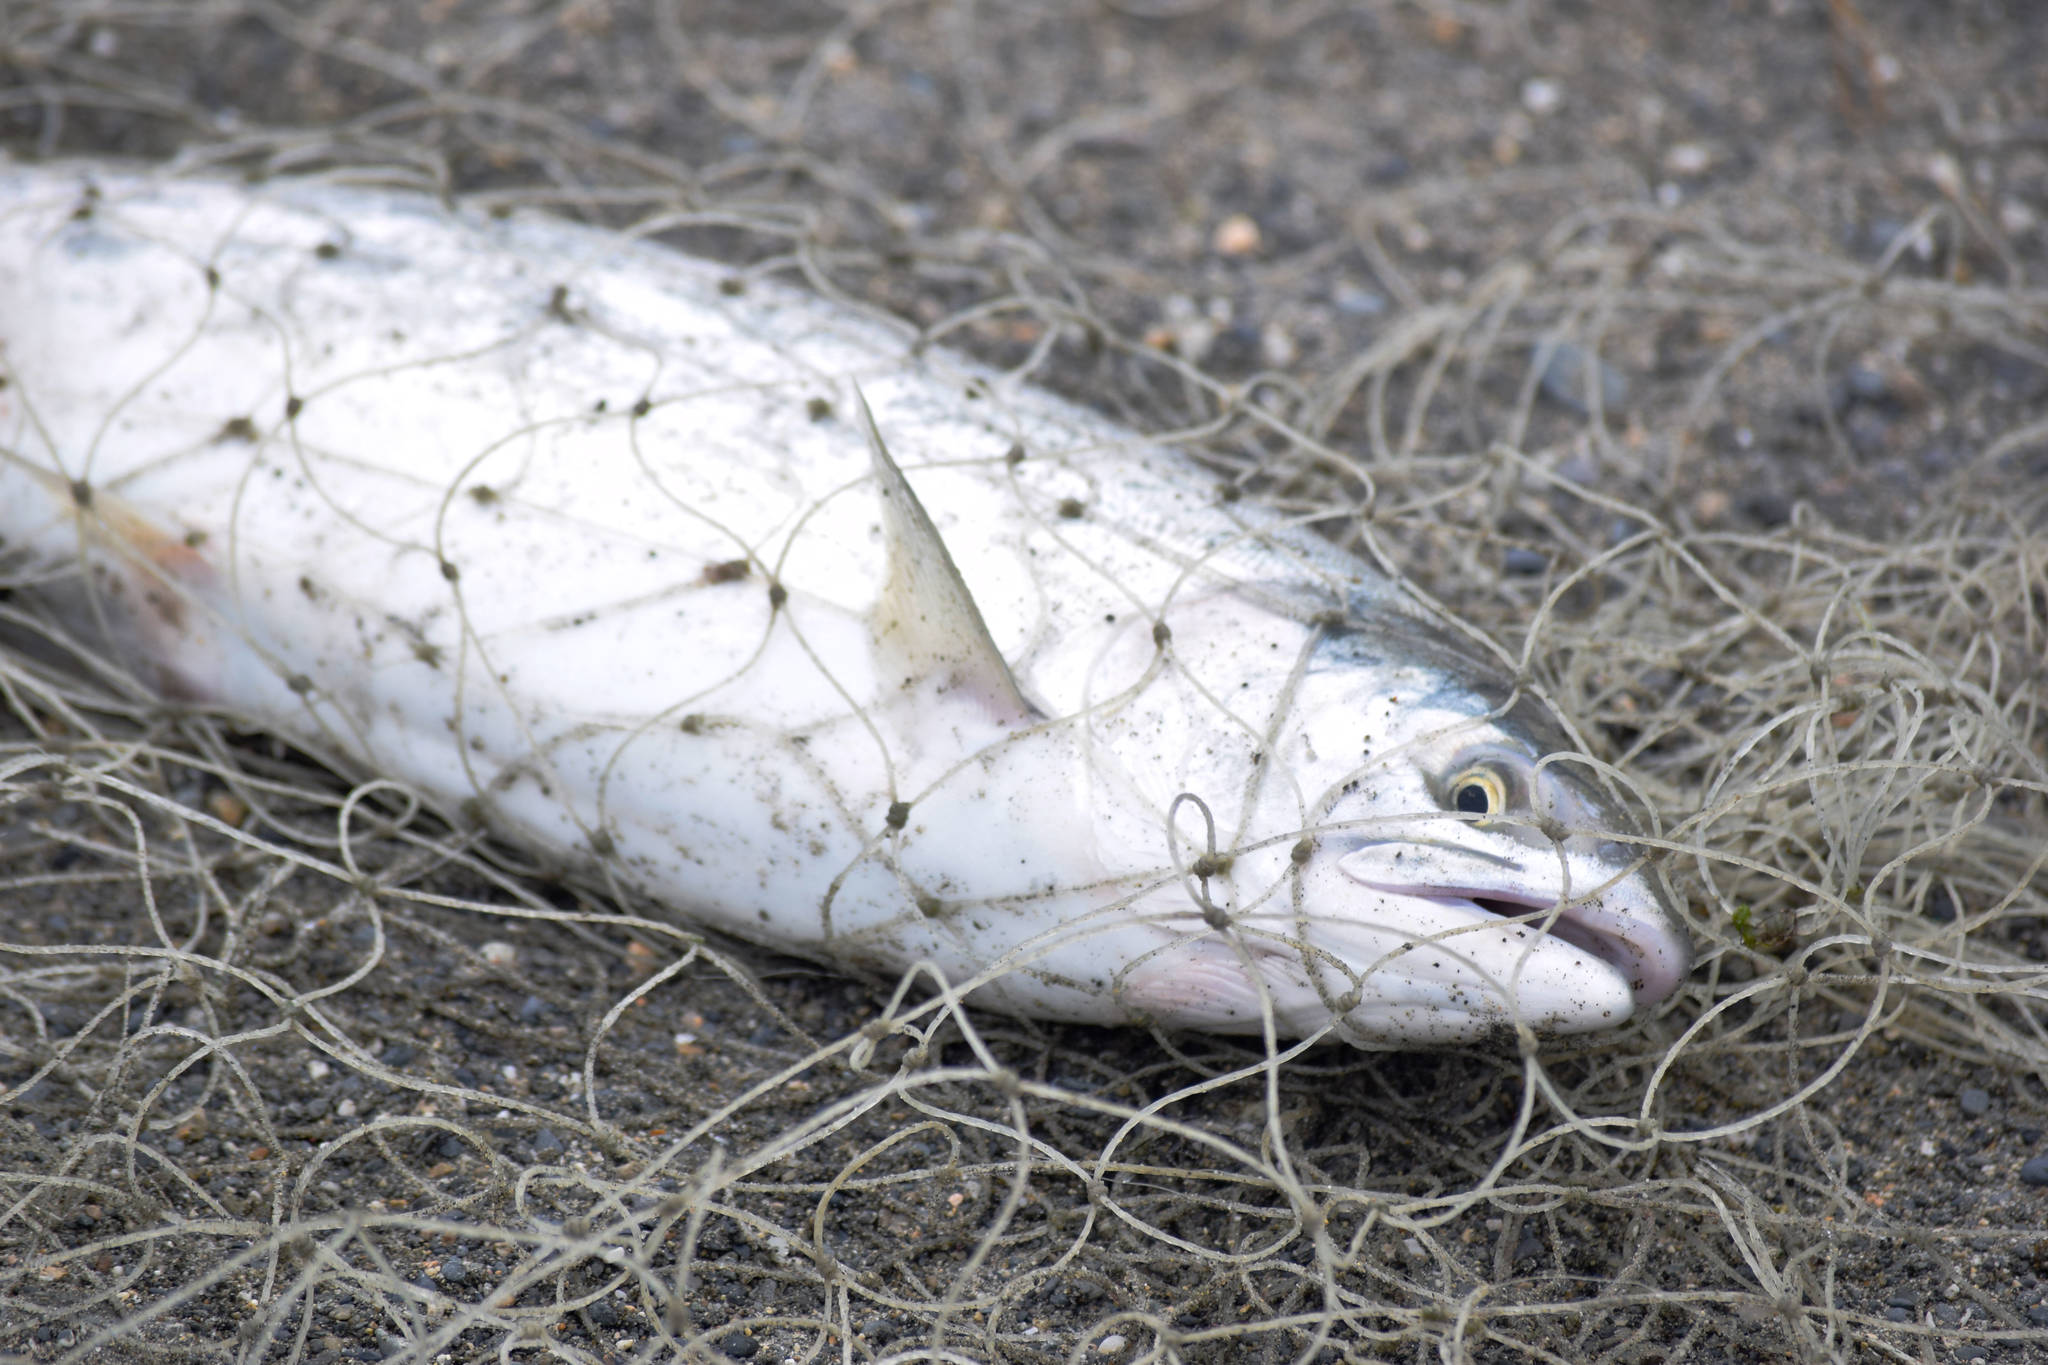 A sockeye salmon caught in a dipnet from the Kasilof River lies on the beach on Tuesday, July 31, 2018 in Kasilof, Alaska. (Photo by Elizabeth Earl/Peninsula Clarion)